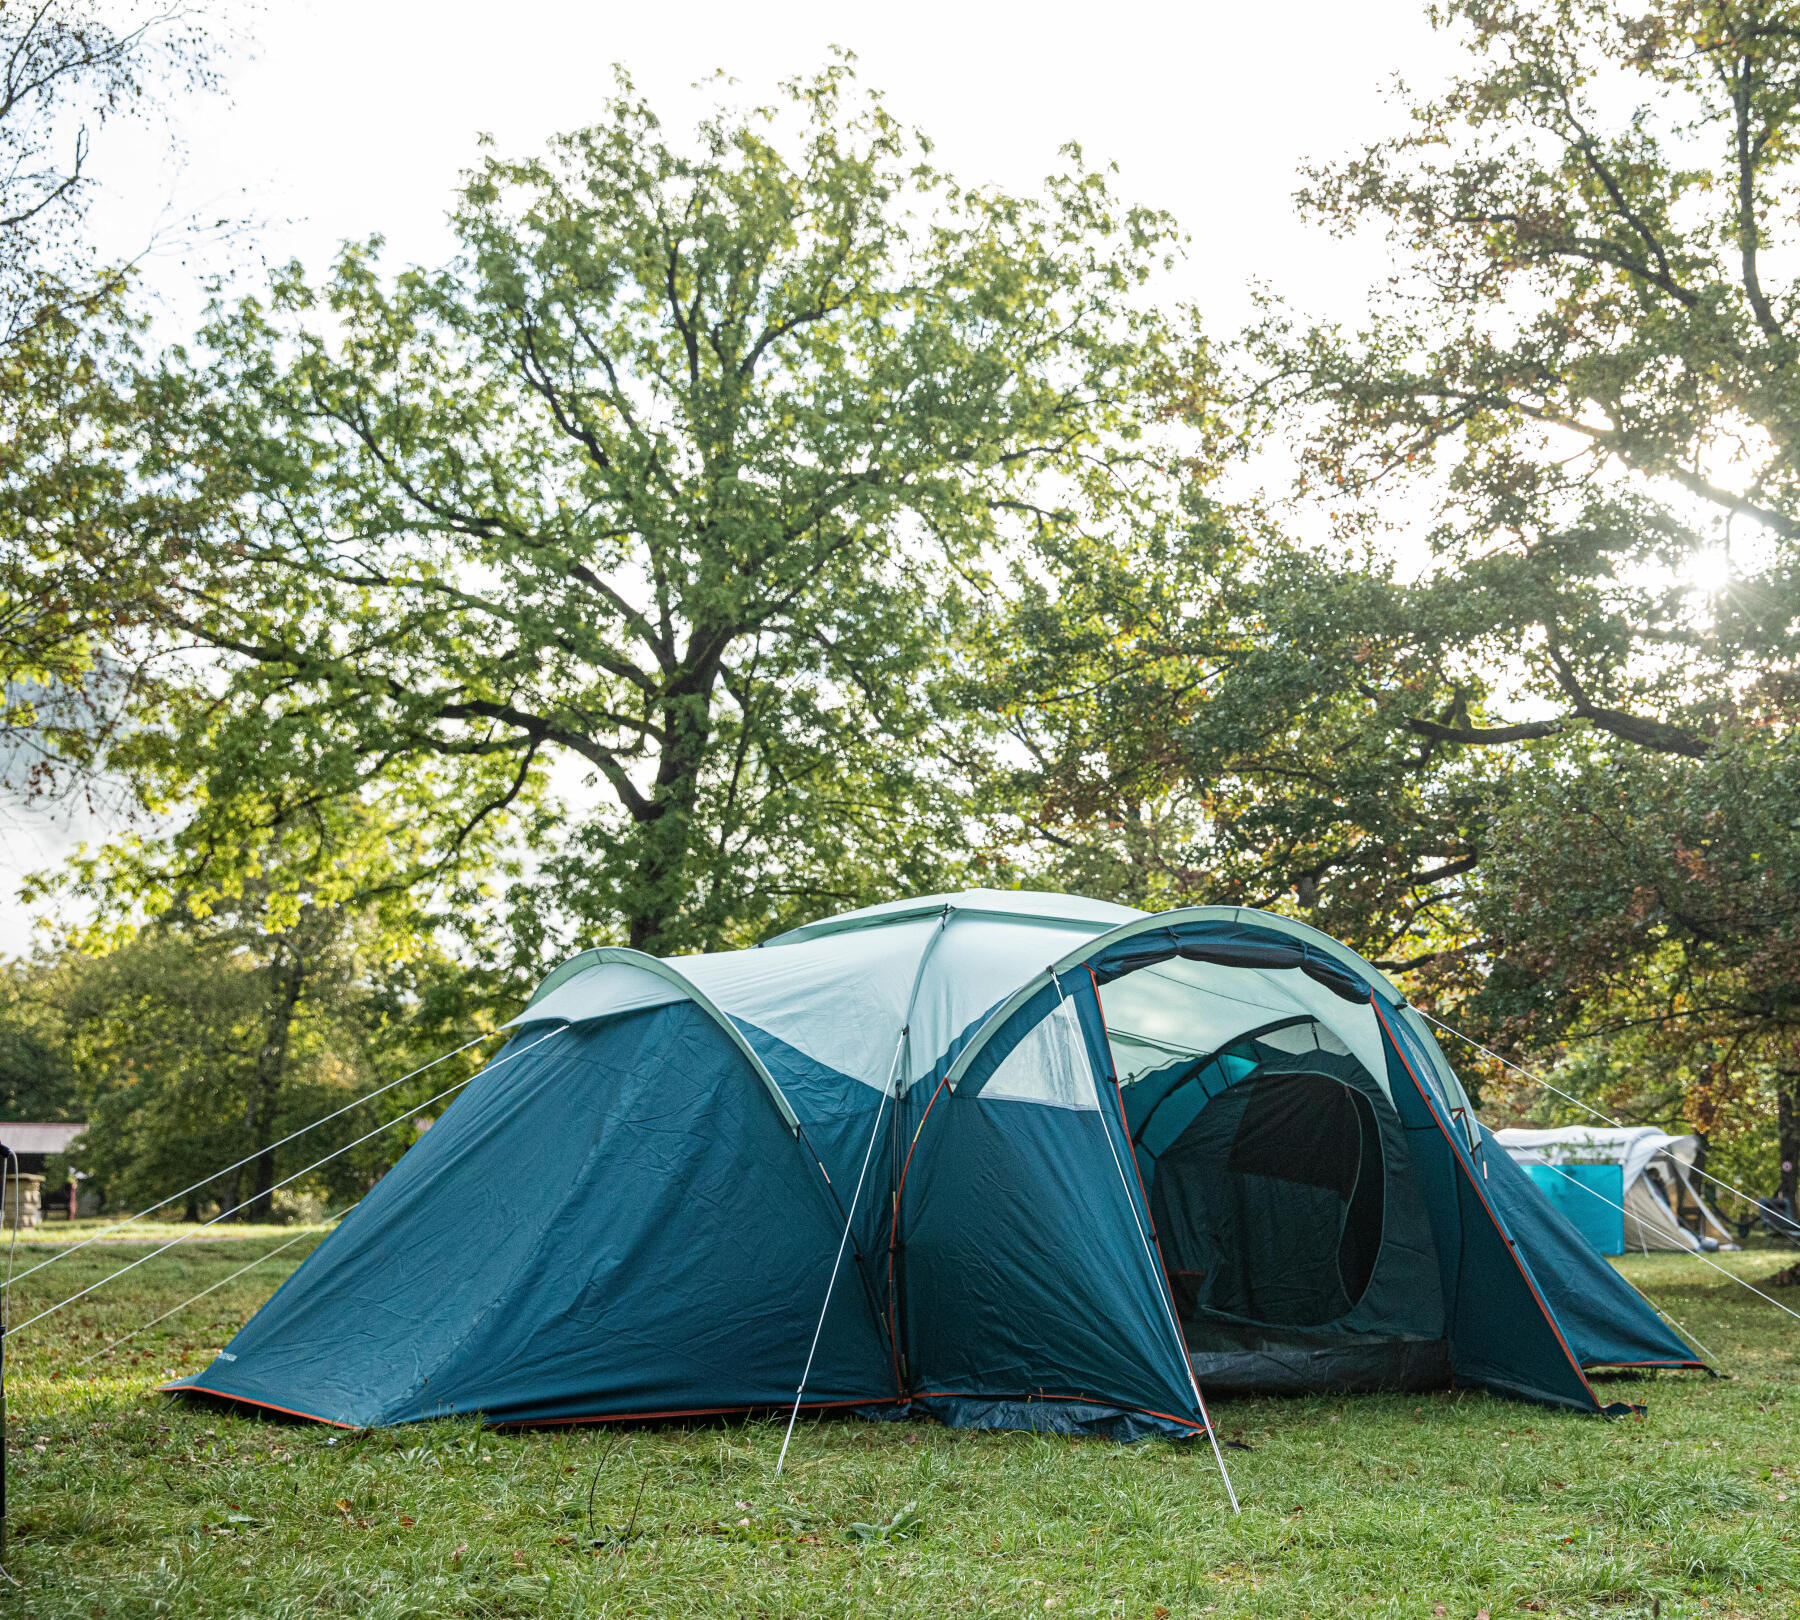 How do you pitch your tent correctly?